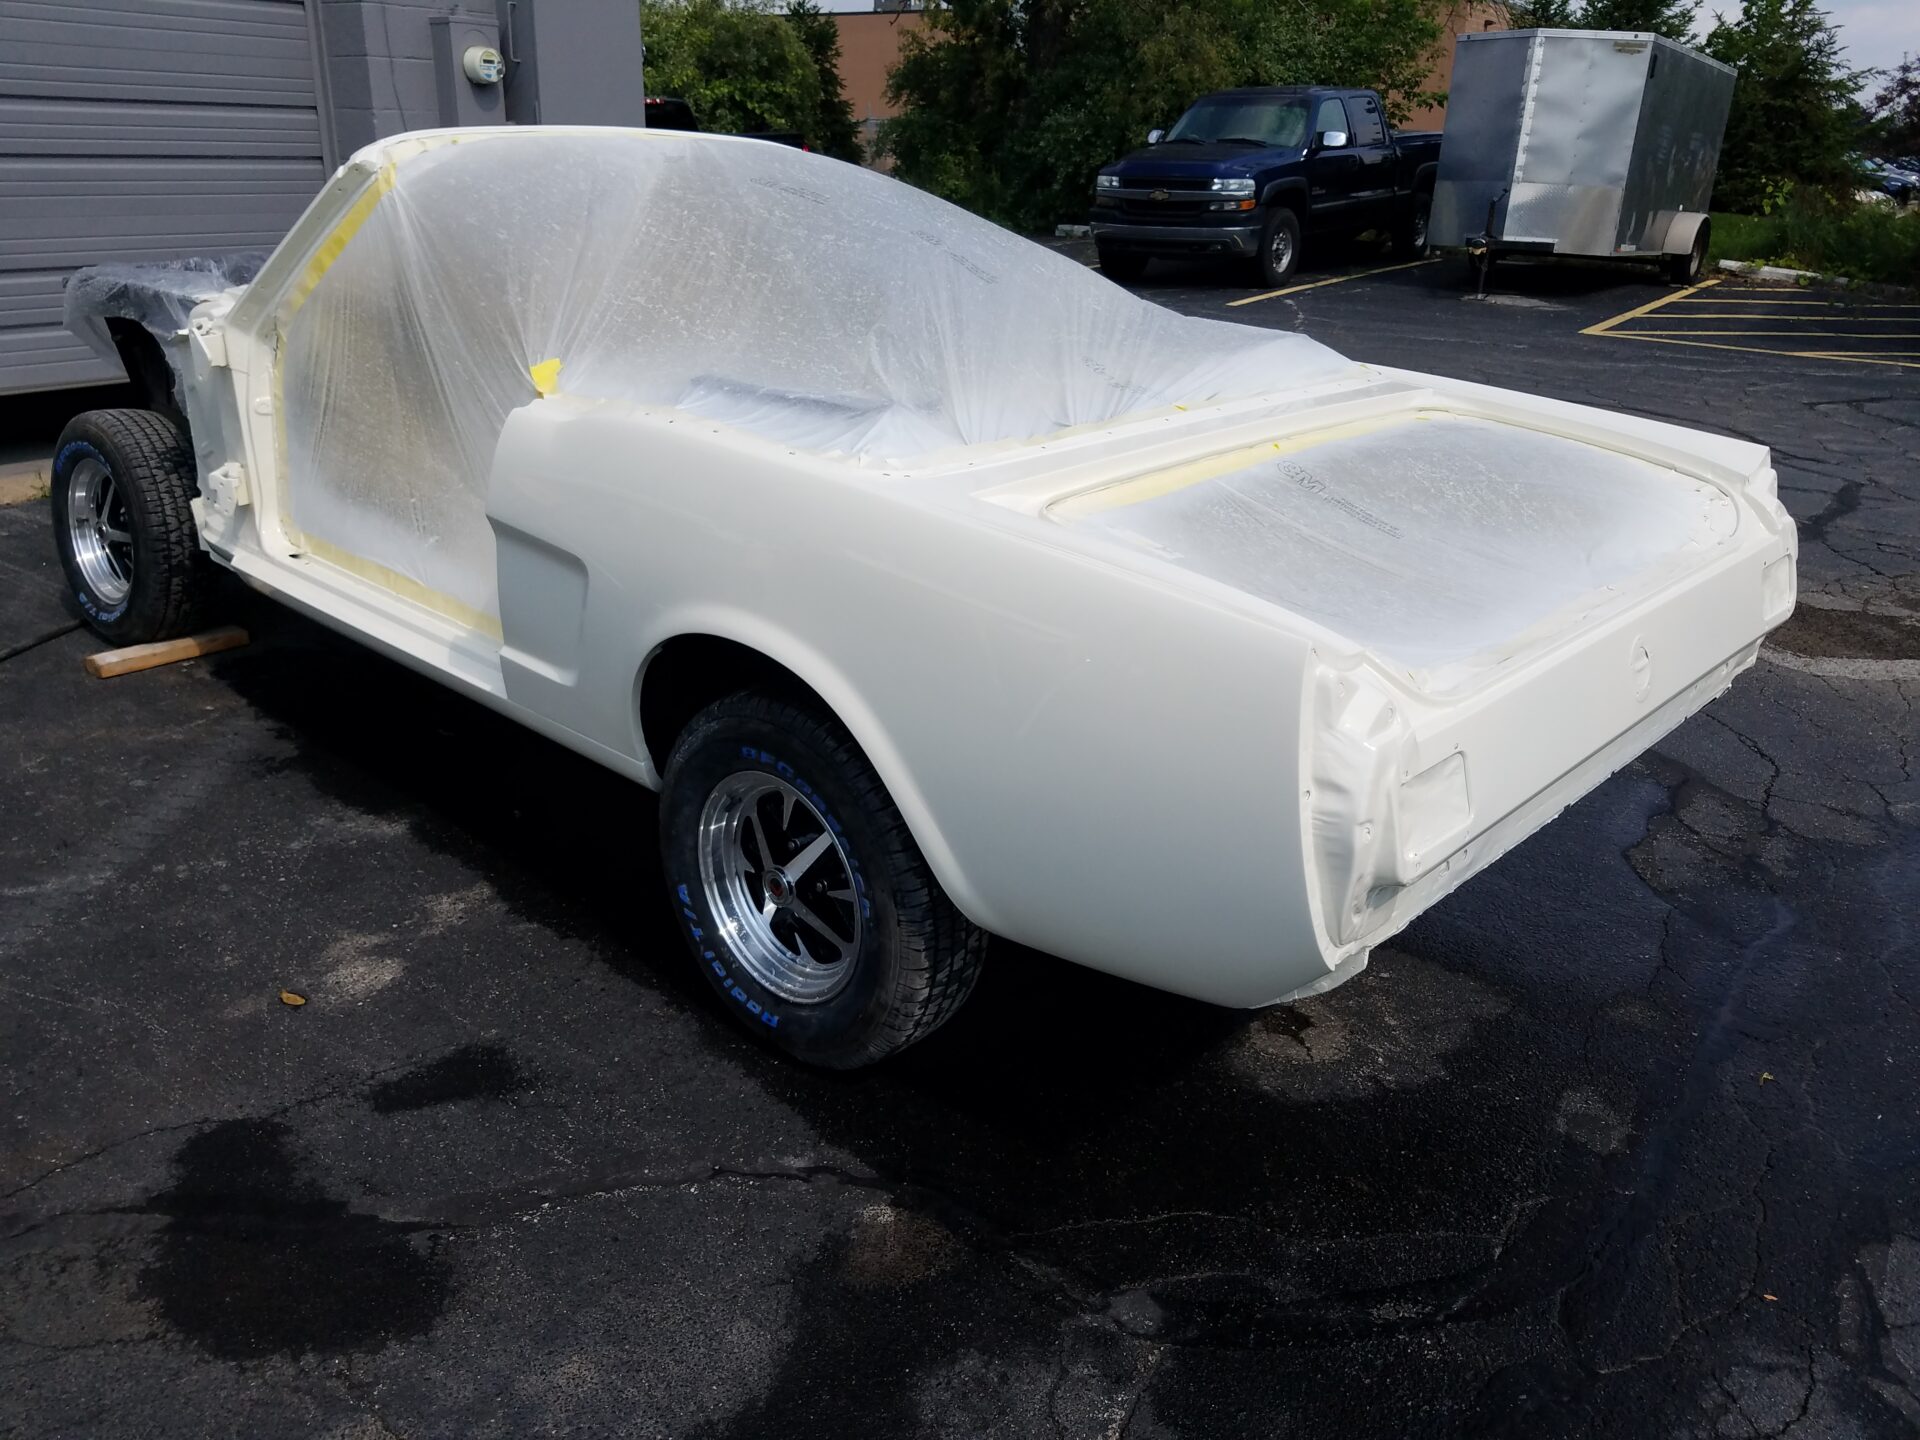 A 1966 Ford Mustang Convertible painted in white